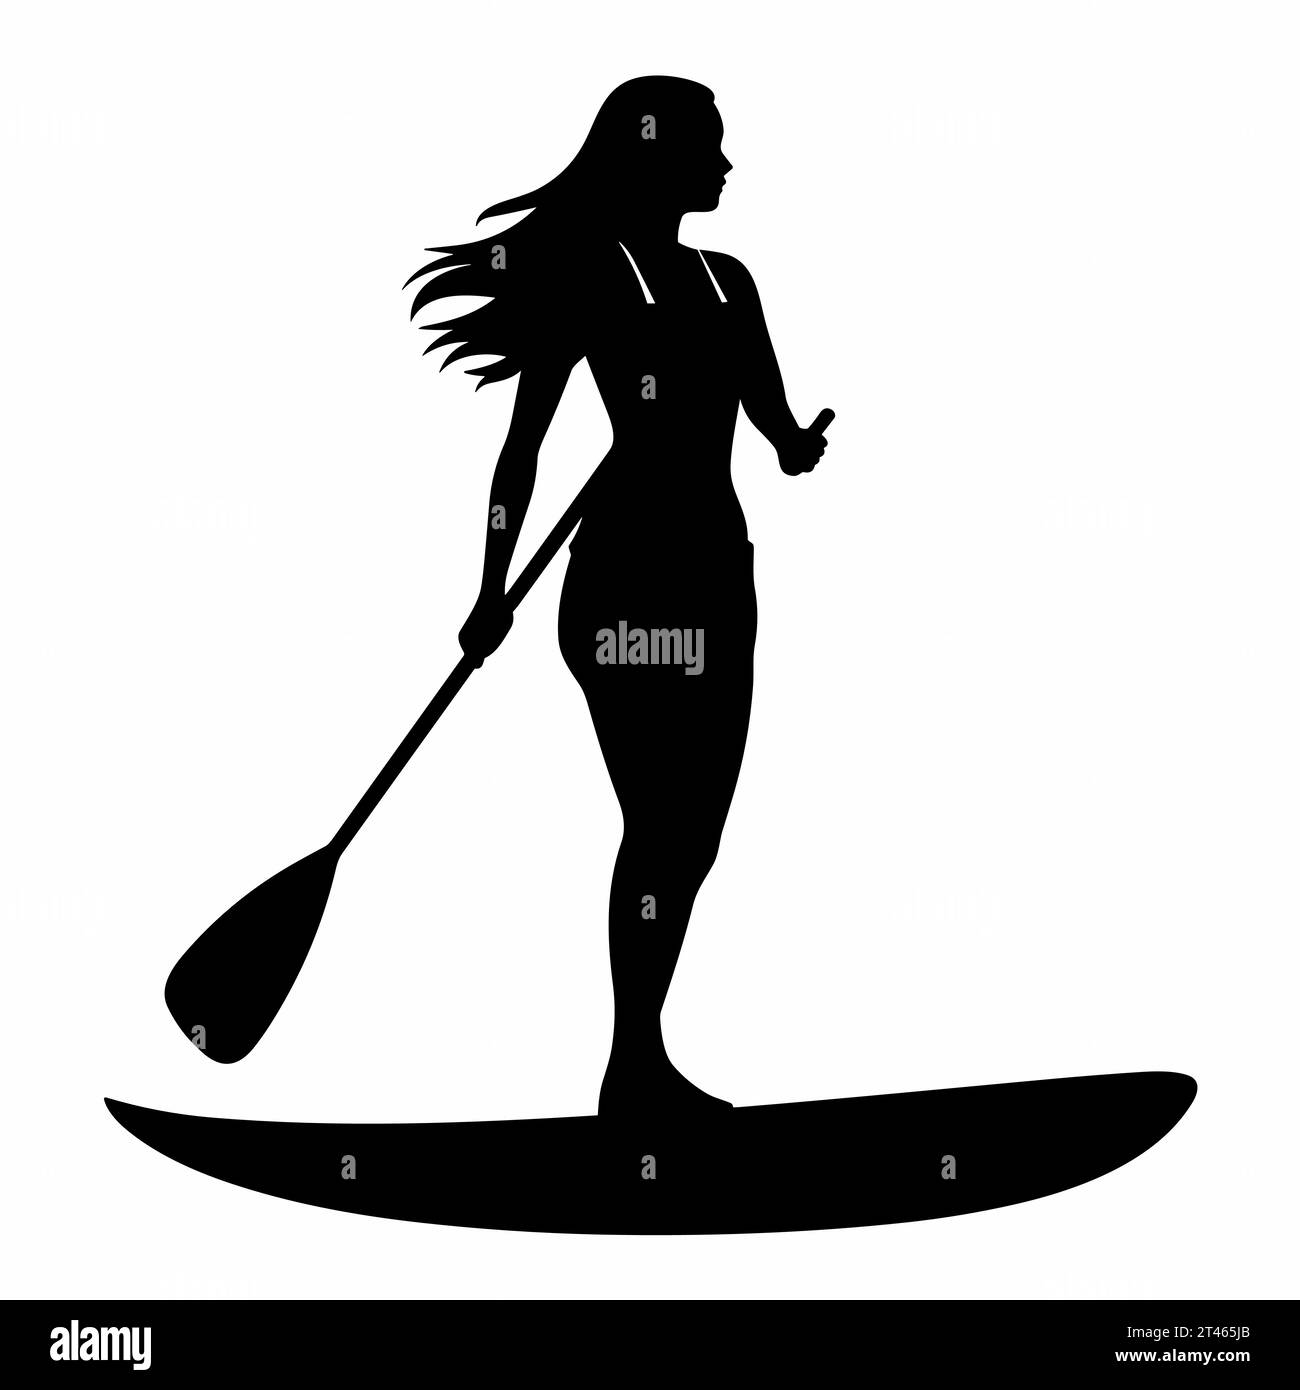 Paddleboarding woman silhouette. Paddleboarding woman black icon on white background Stock Vector